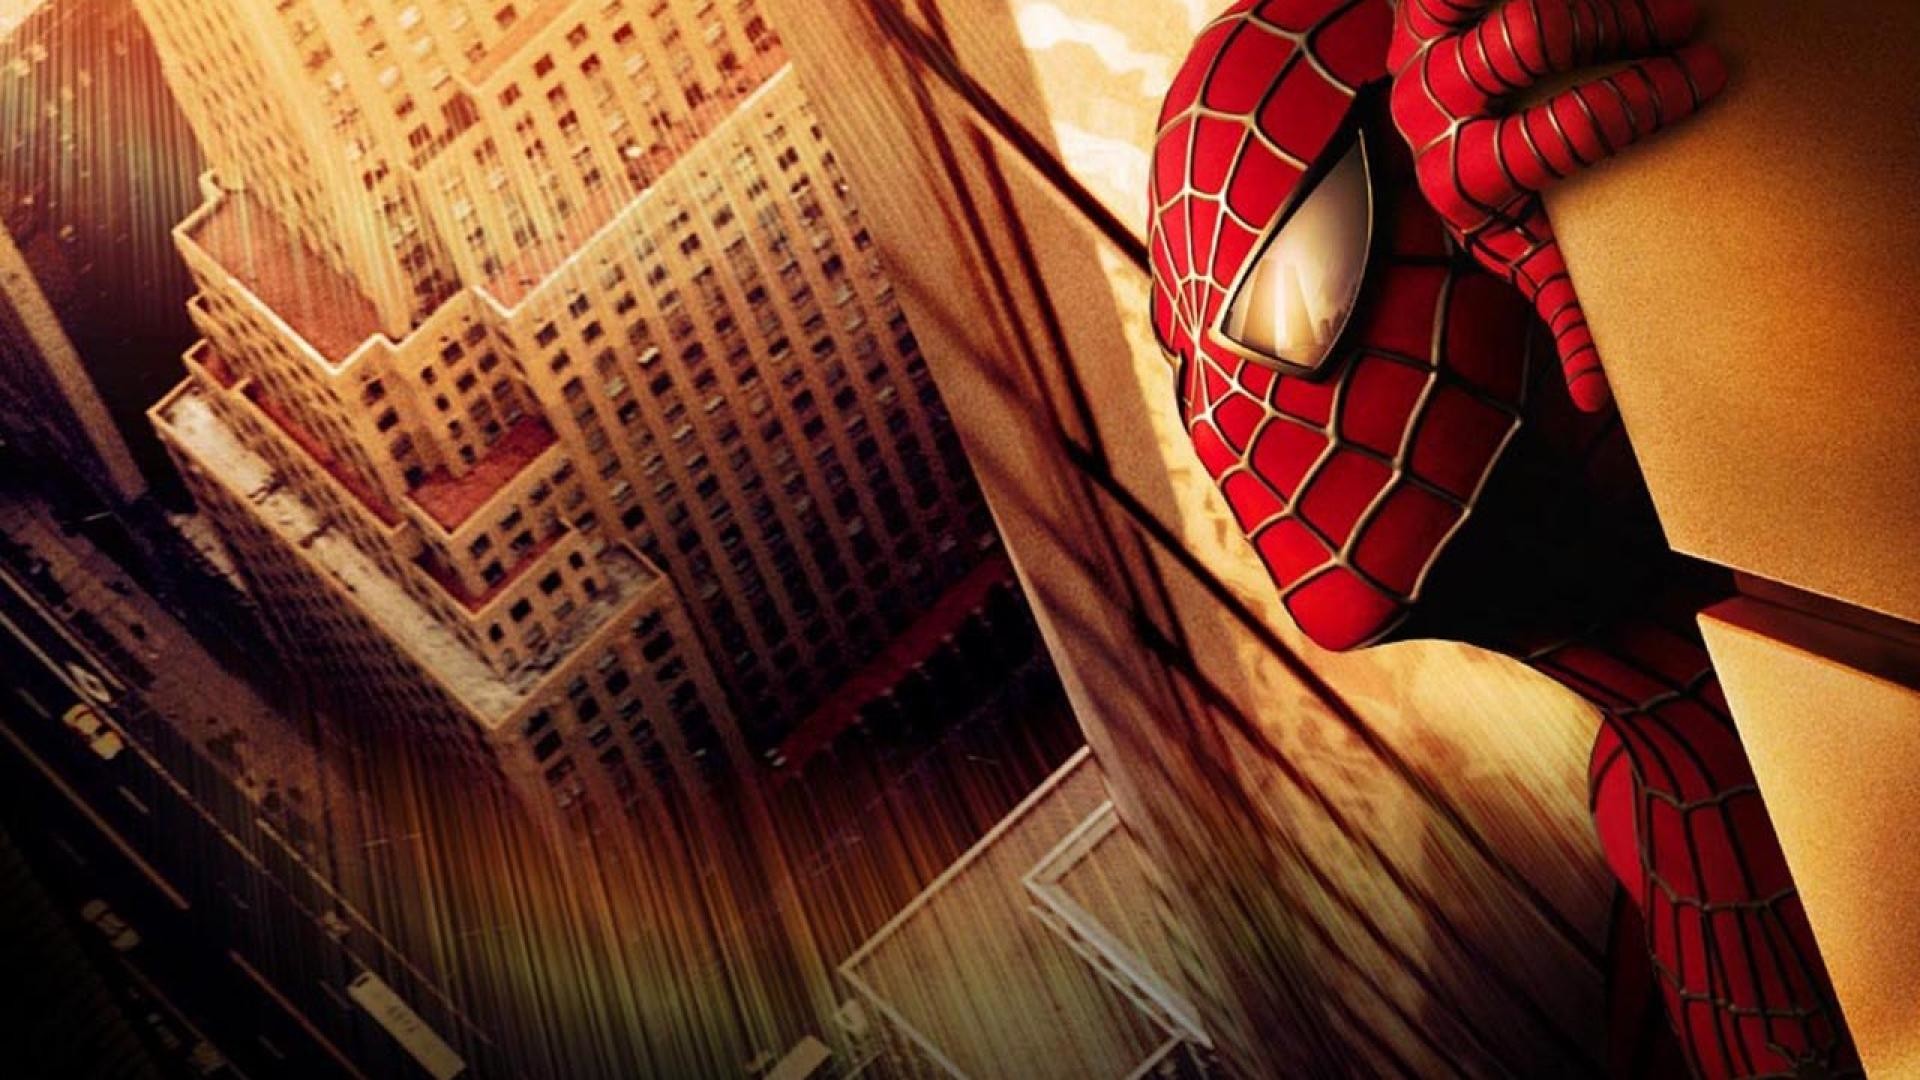 1920x1080 Spiderman wallpaper 1280x1024 - (#25562) - High Quality and .